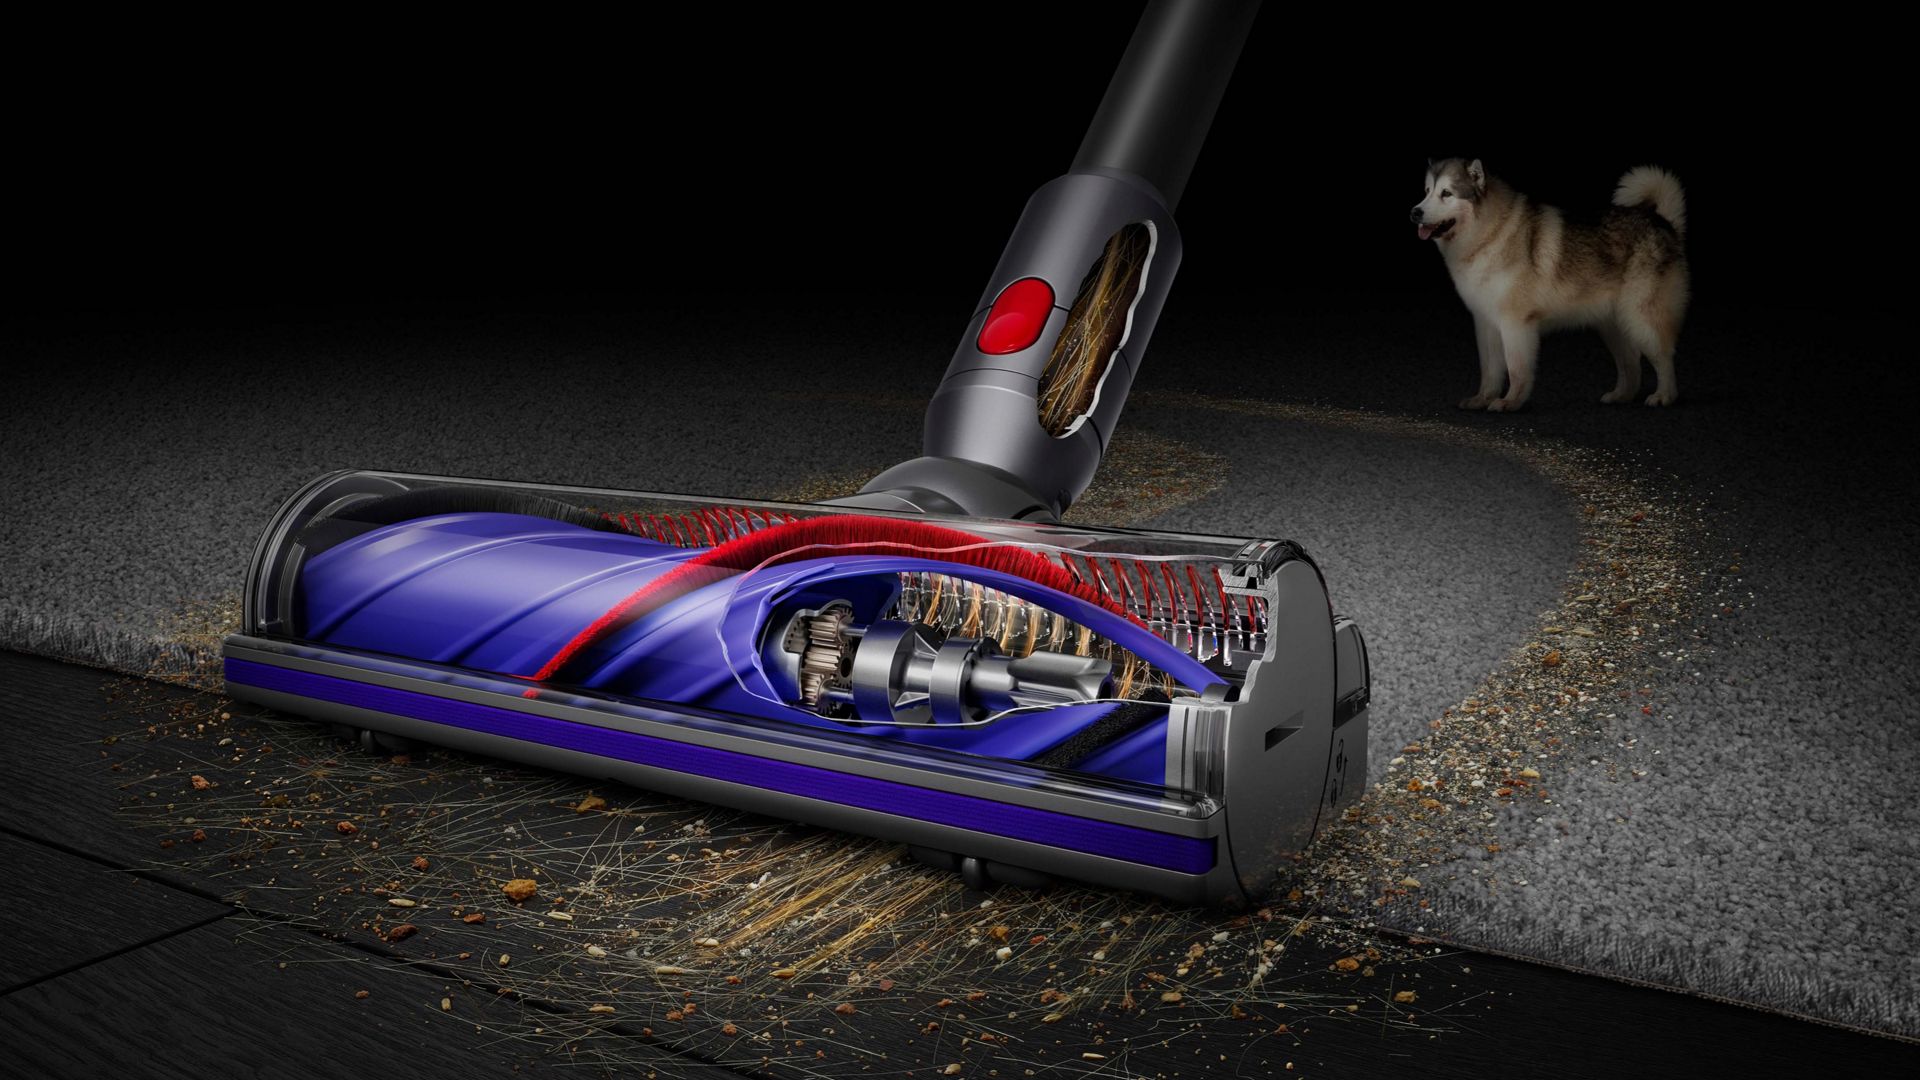 Dyson V8 Absolute cord-free vacuum cleaner